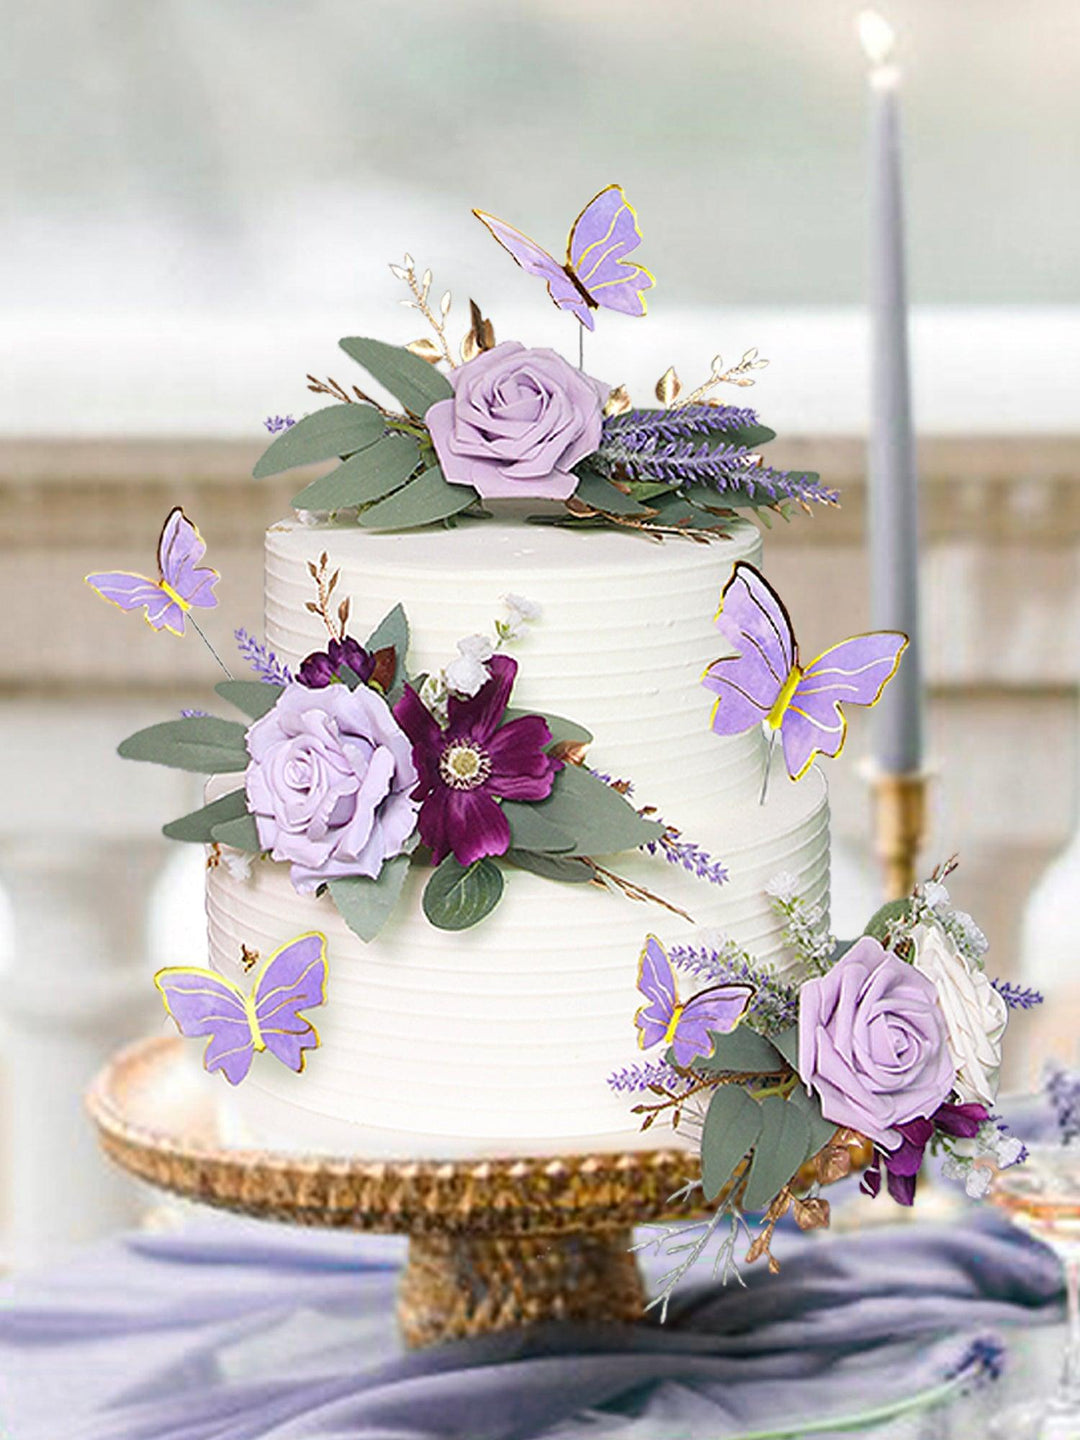 Unleashing Creativity in Your Wedding: A Closer Look at this Purple Cake Decorating Flowers - Rinlong Flower